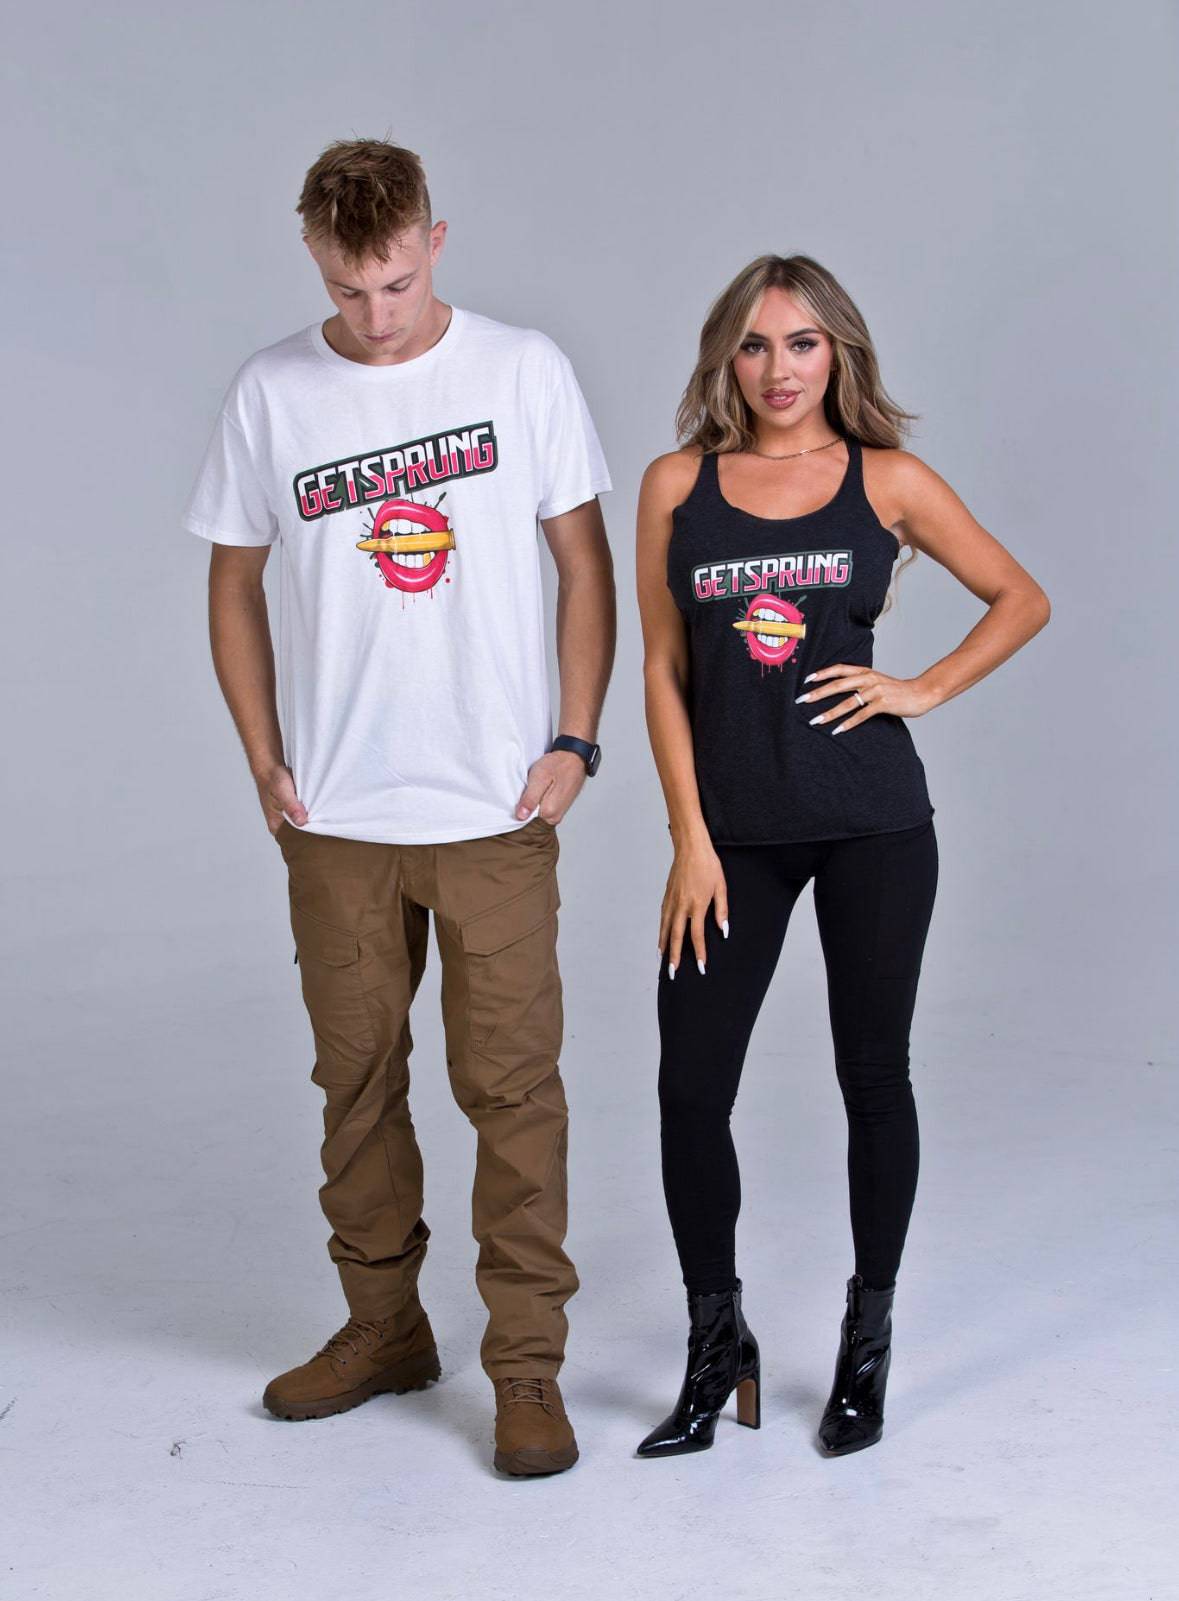 Unisex get sprung t-shirts with bullet lips 